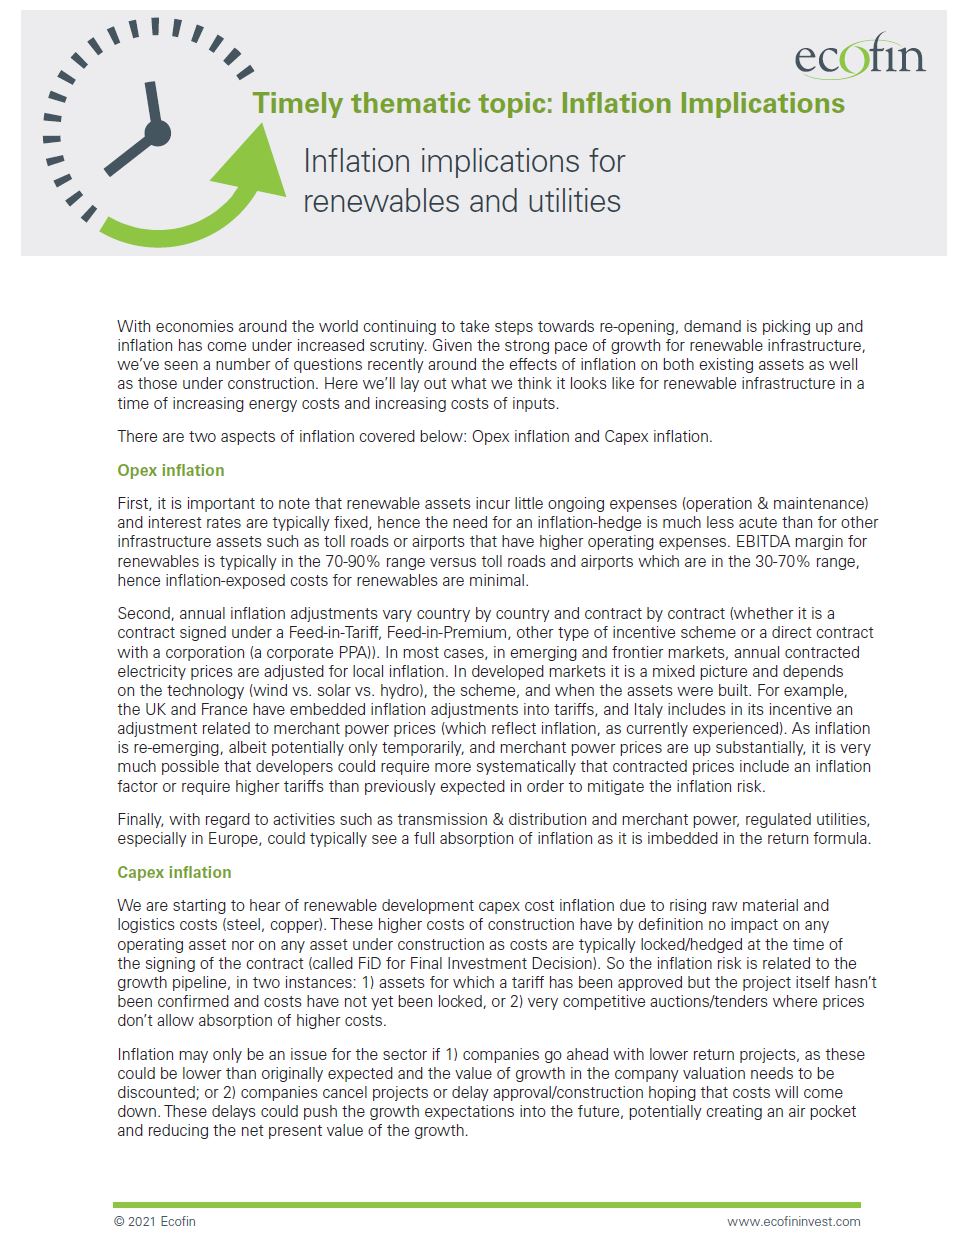 Ecofin Timely Thematic Topic: Inflation Implications